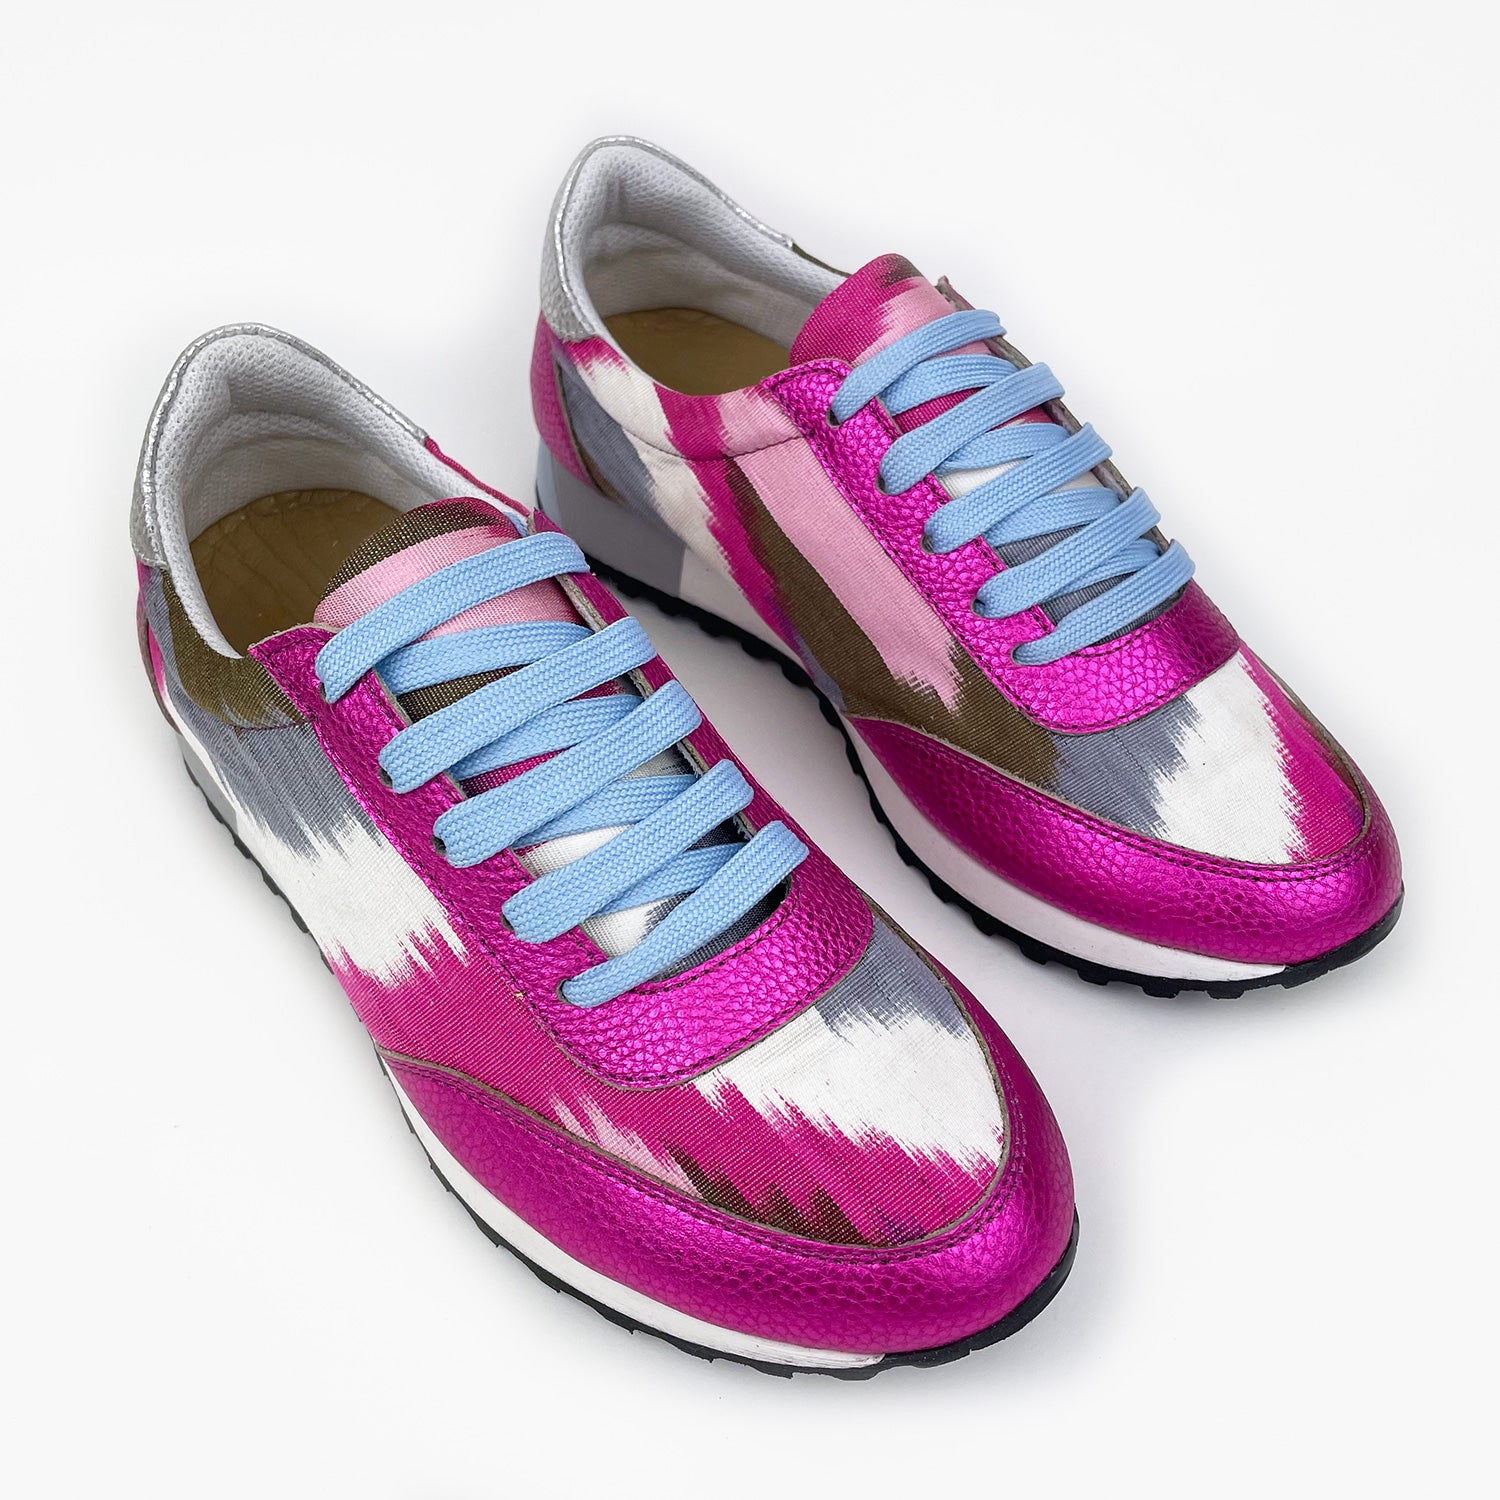 Pink, white, grey and green Ikat Silk trainers with pink metallic leather and pale blue shoelaces